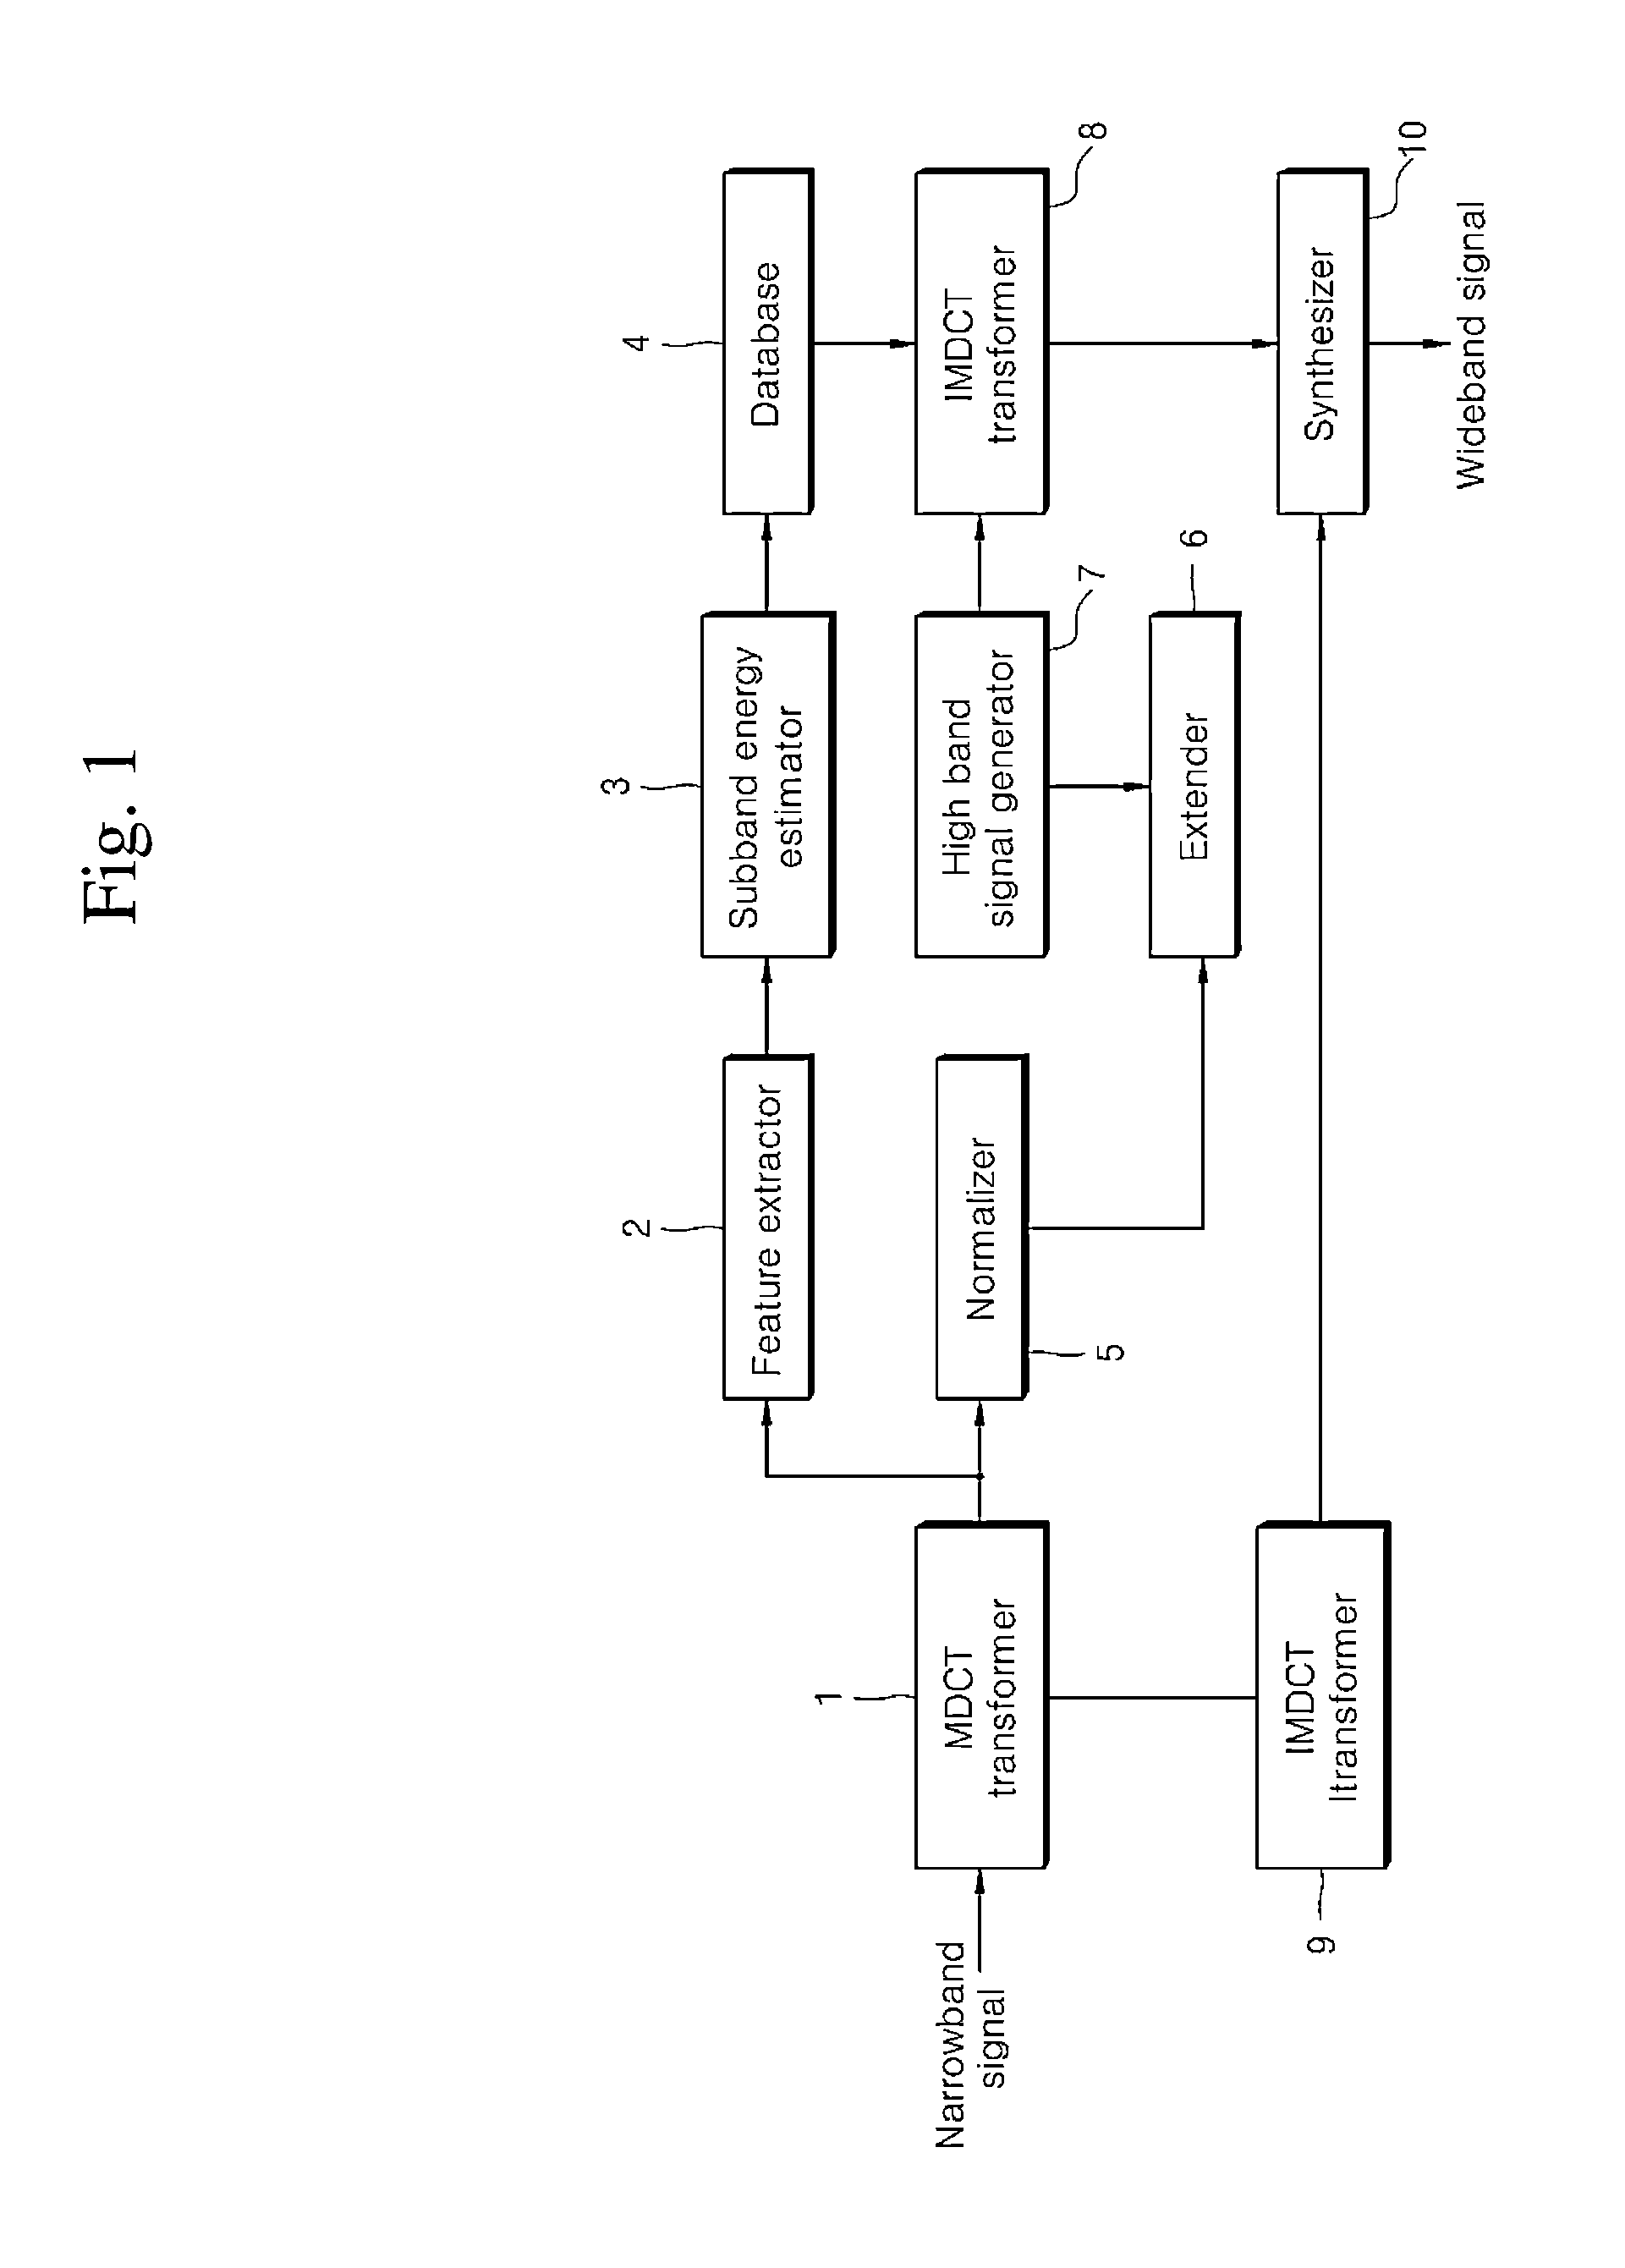 Apparatus and method for extending bandwidth of sound signal